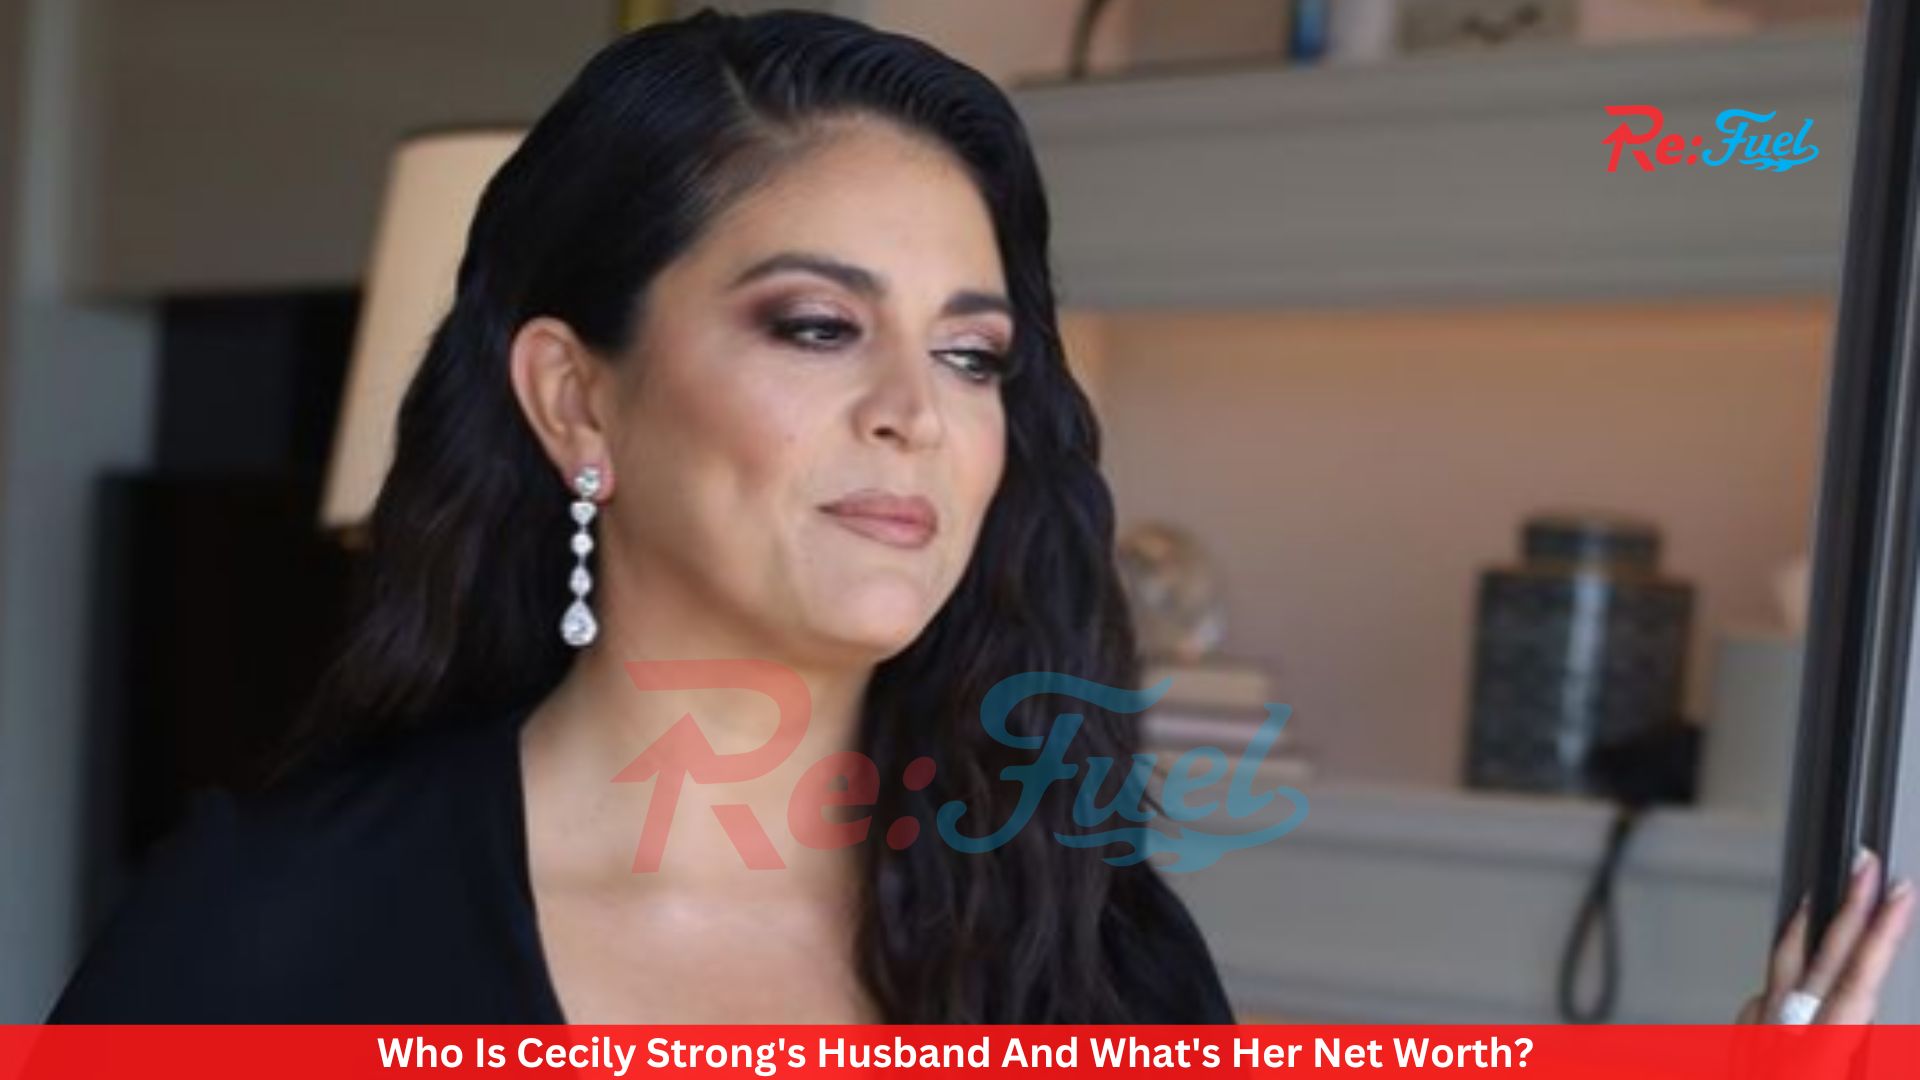 Who Is Cecily Strong's Husband And What's Her Net Worth?